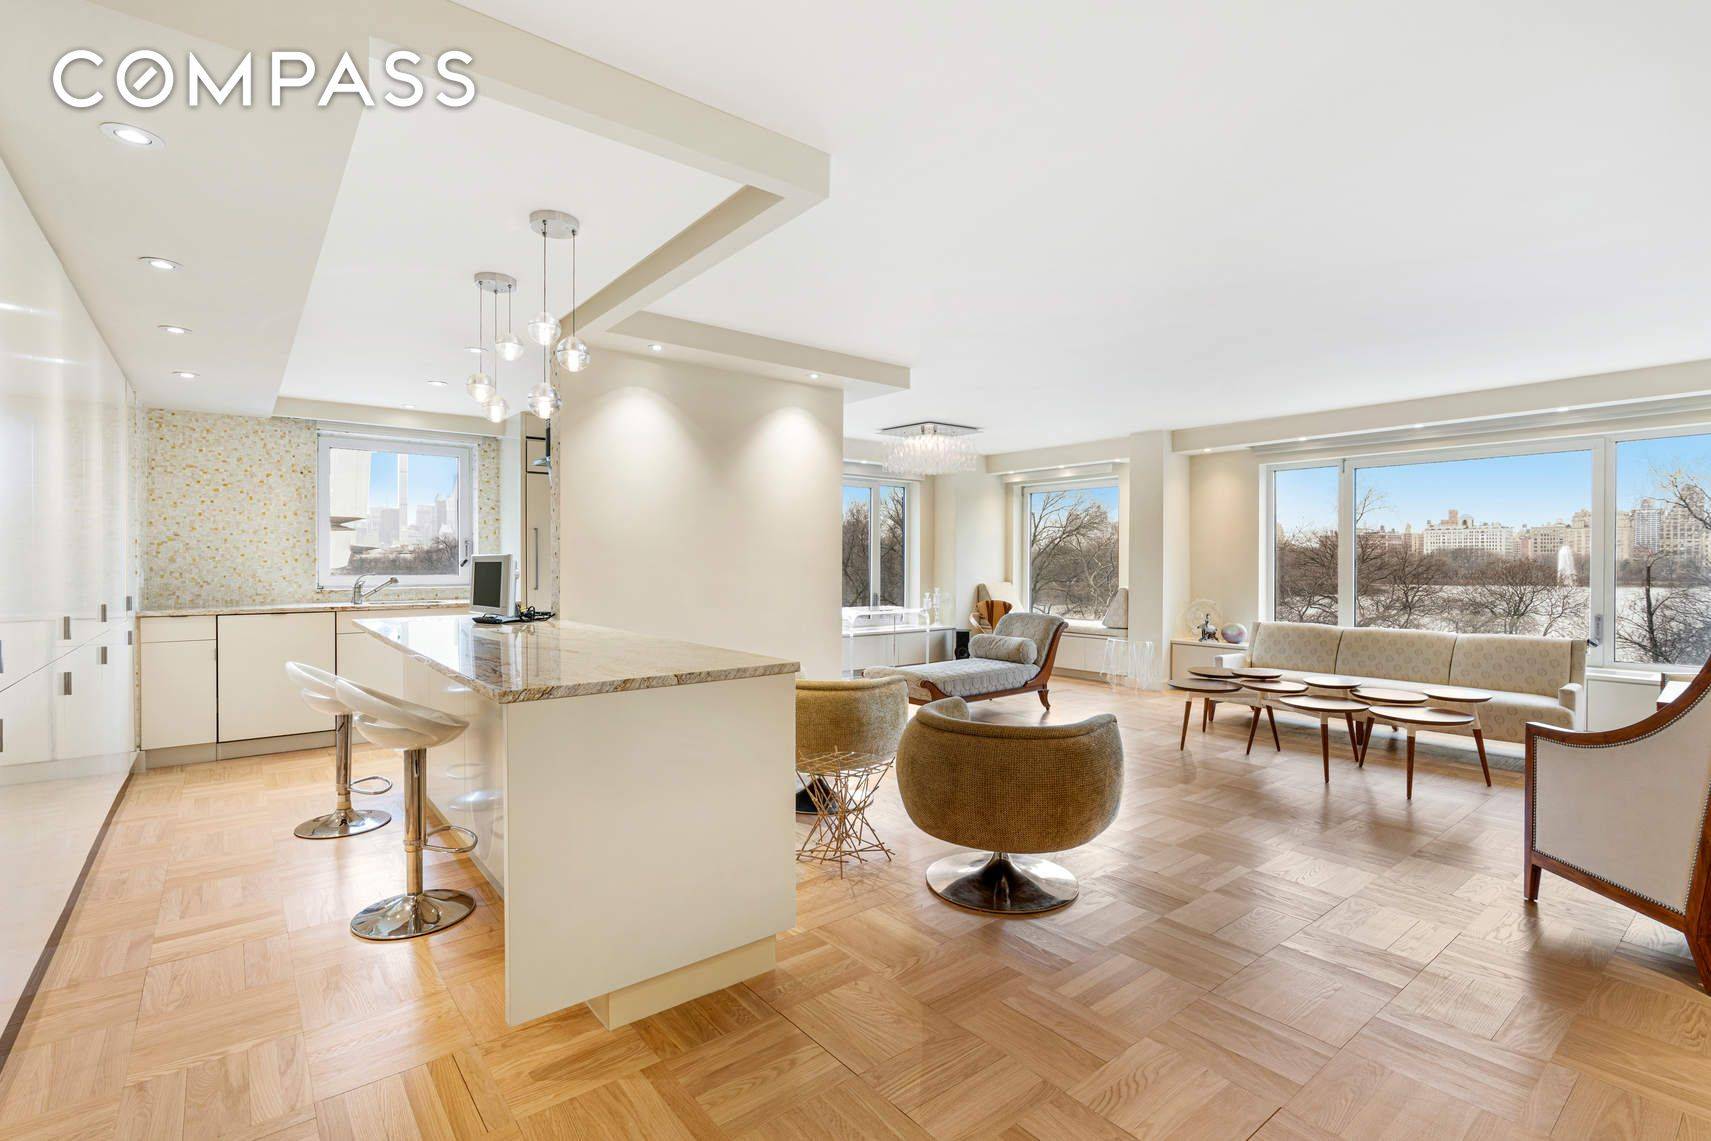 A Peaceful Oasis at 1080 Fifth Avenue A rare gem with direct Central Park, Reservoir and NYC skyline views from corner 5 room home in pristine, triple mint, move in ...